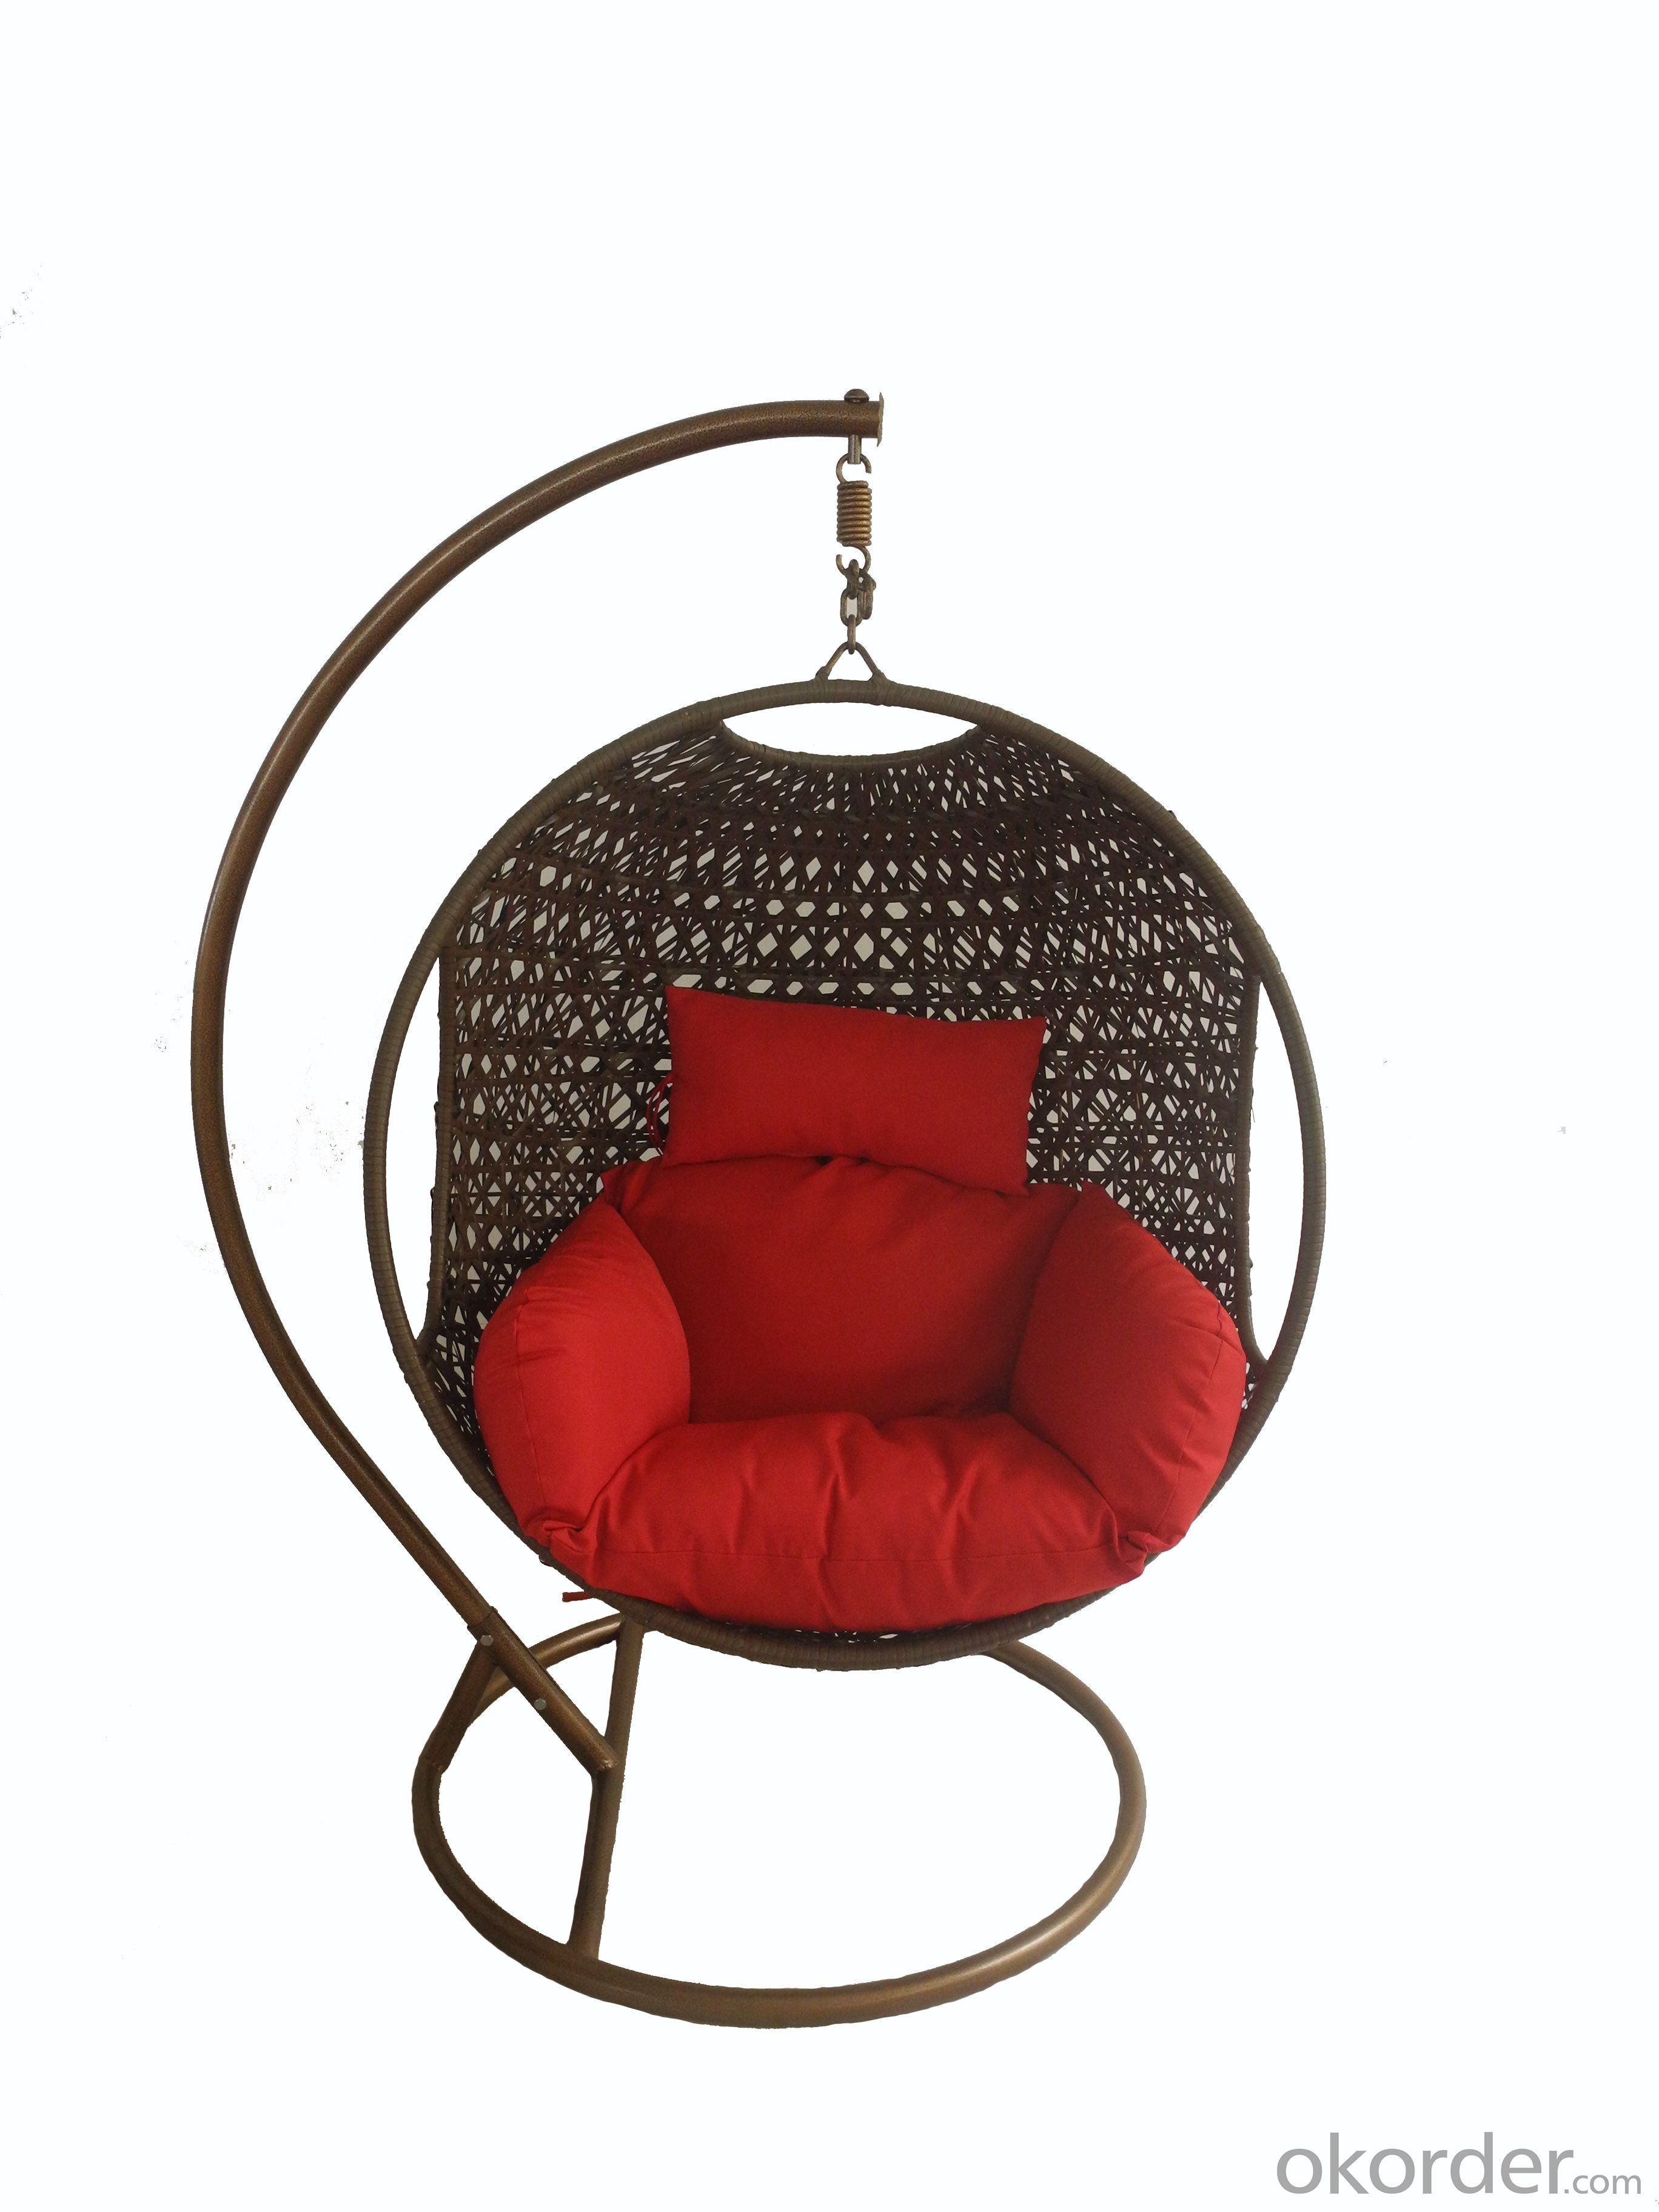 Swing Chair Outdoor Hanging Patio Furniture CMAX-CX016